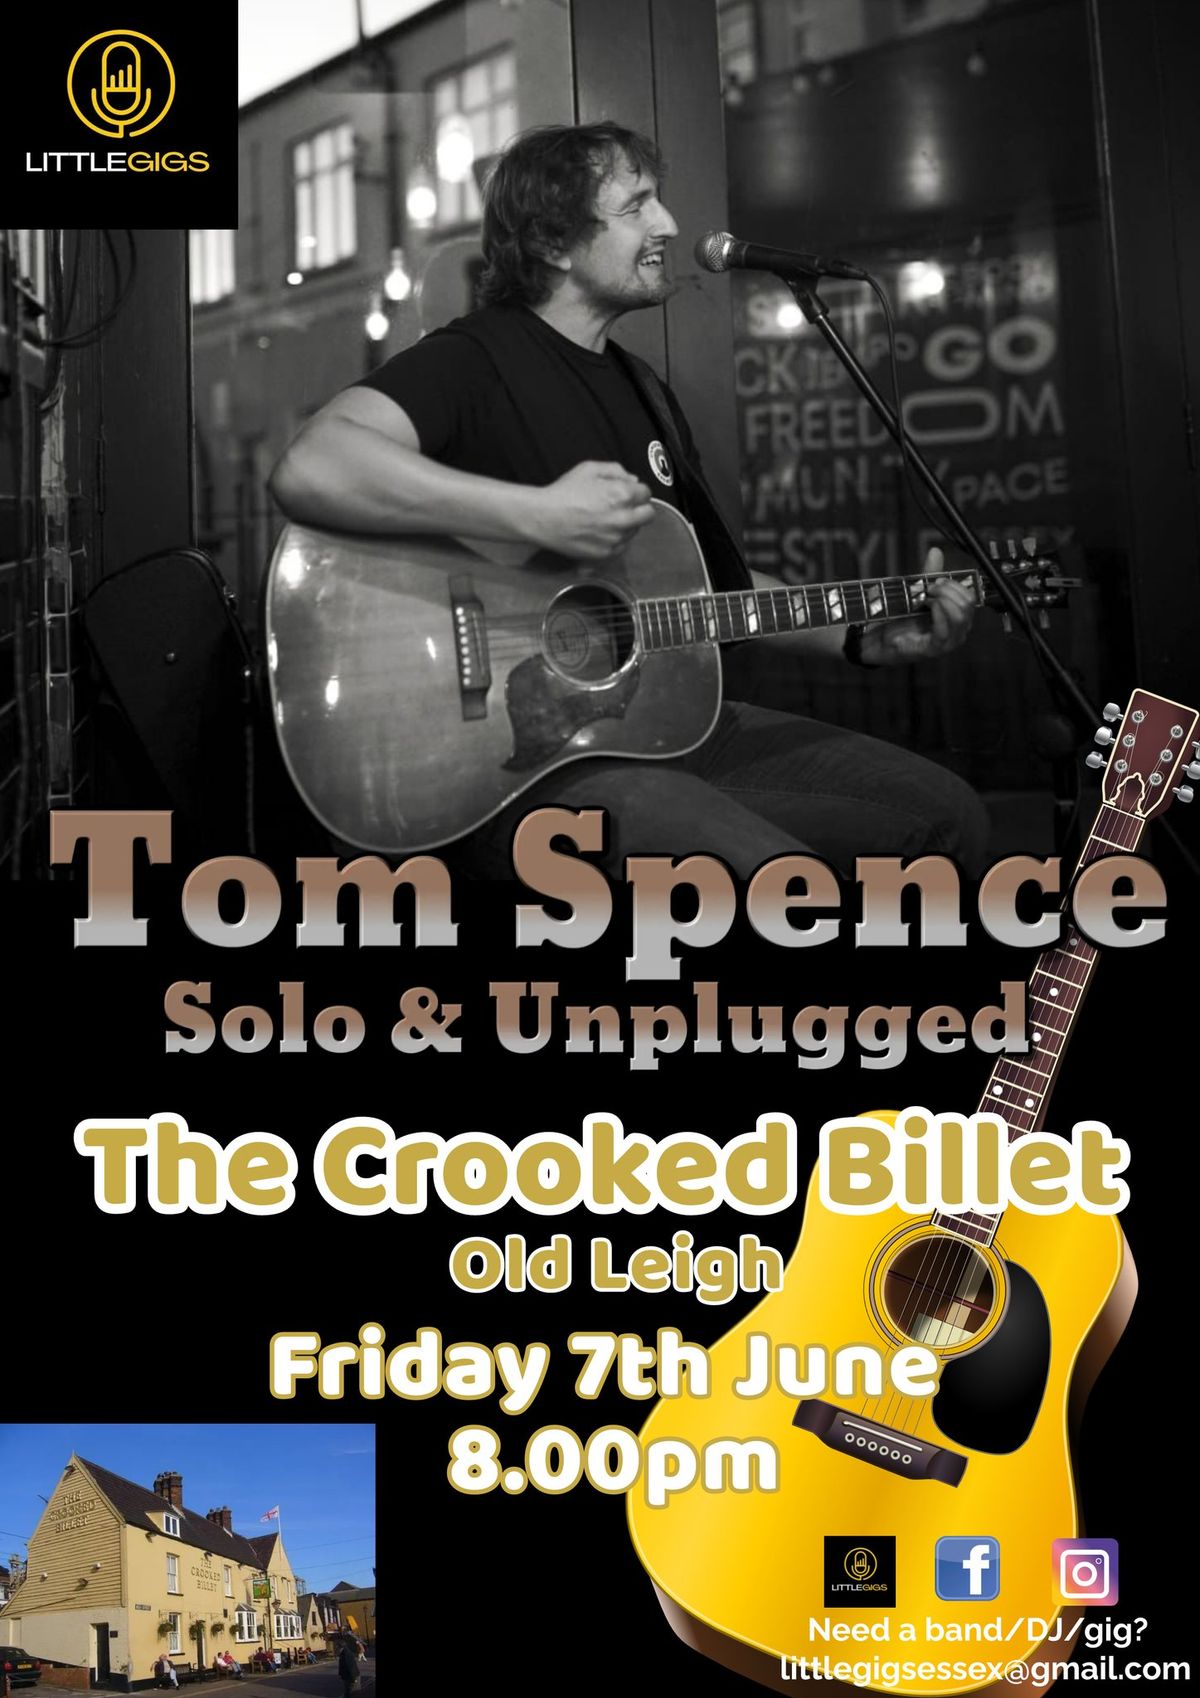 Tom Spence - Solo & Unplugged at The Crooked Billet, Old Leigh \ud83c\udfa4